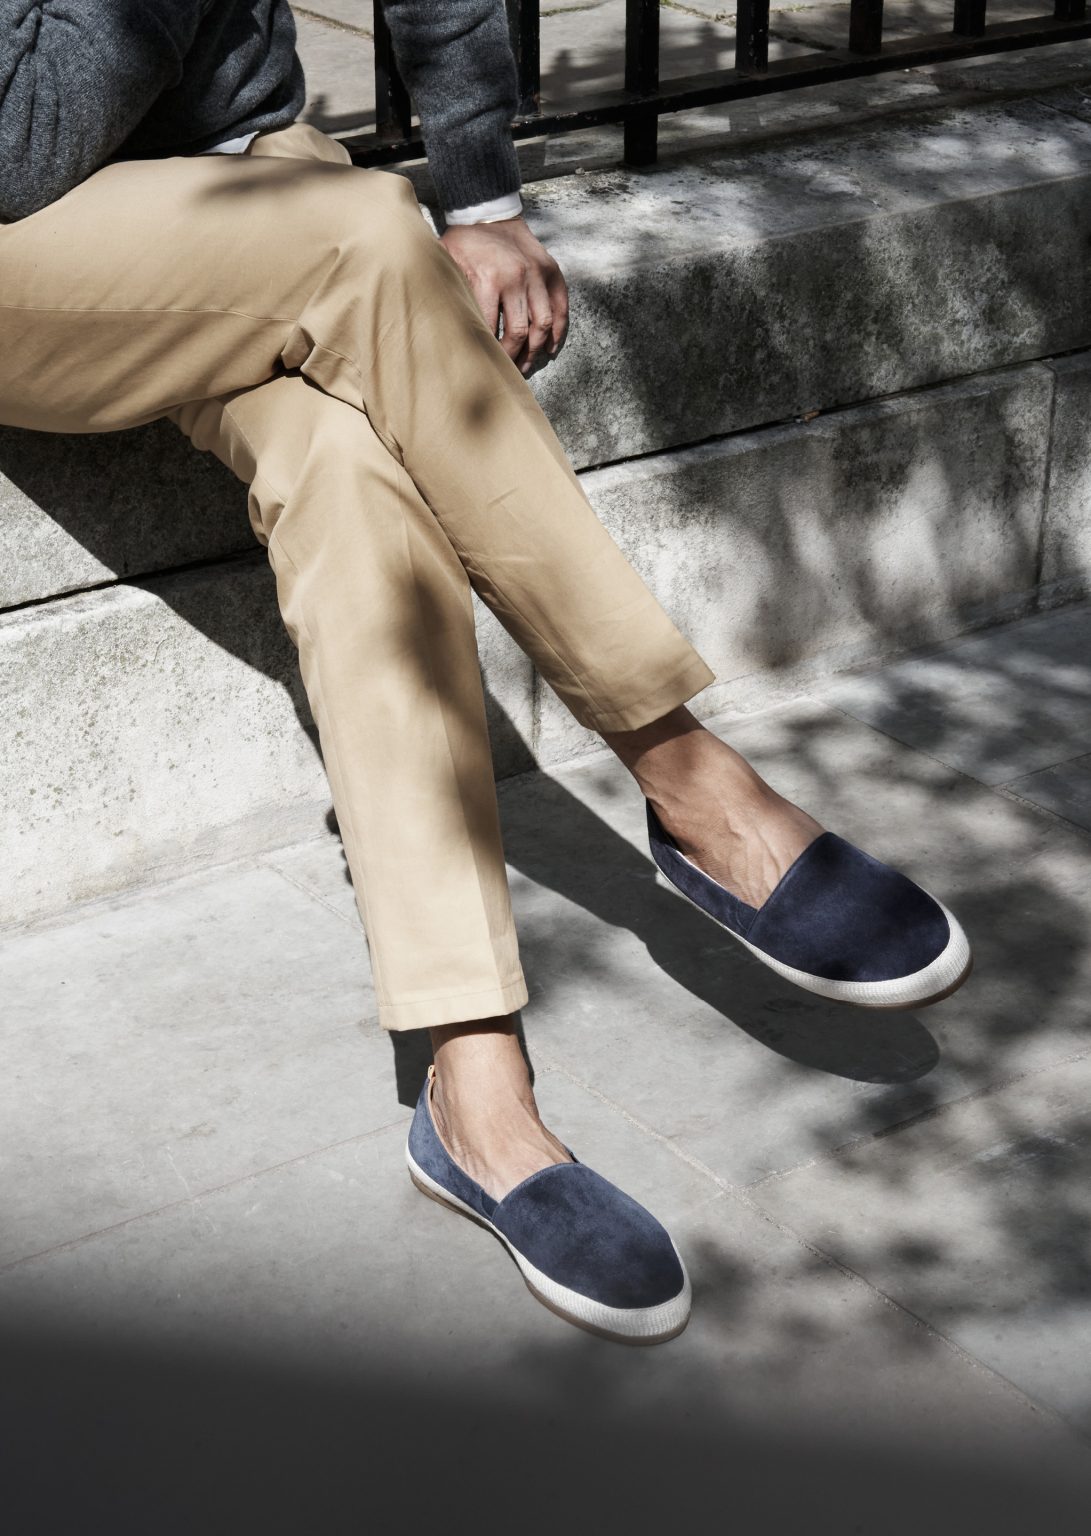 Blue Espadrilles for Men | MULO Shoes | High-quality Suede Leather